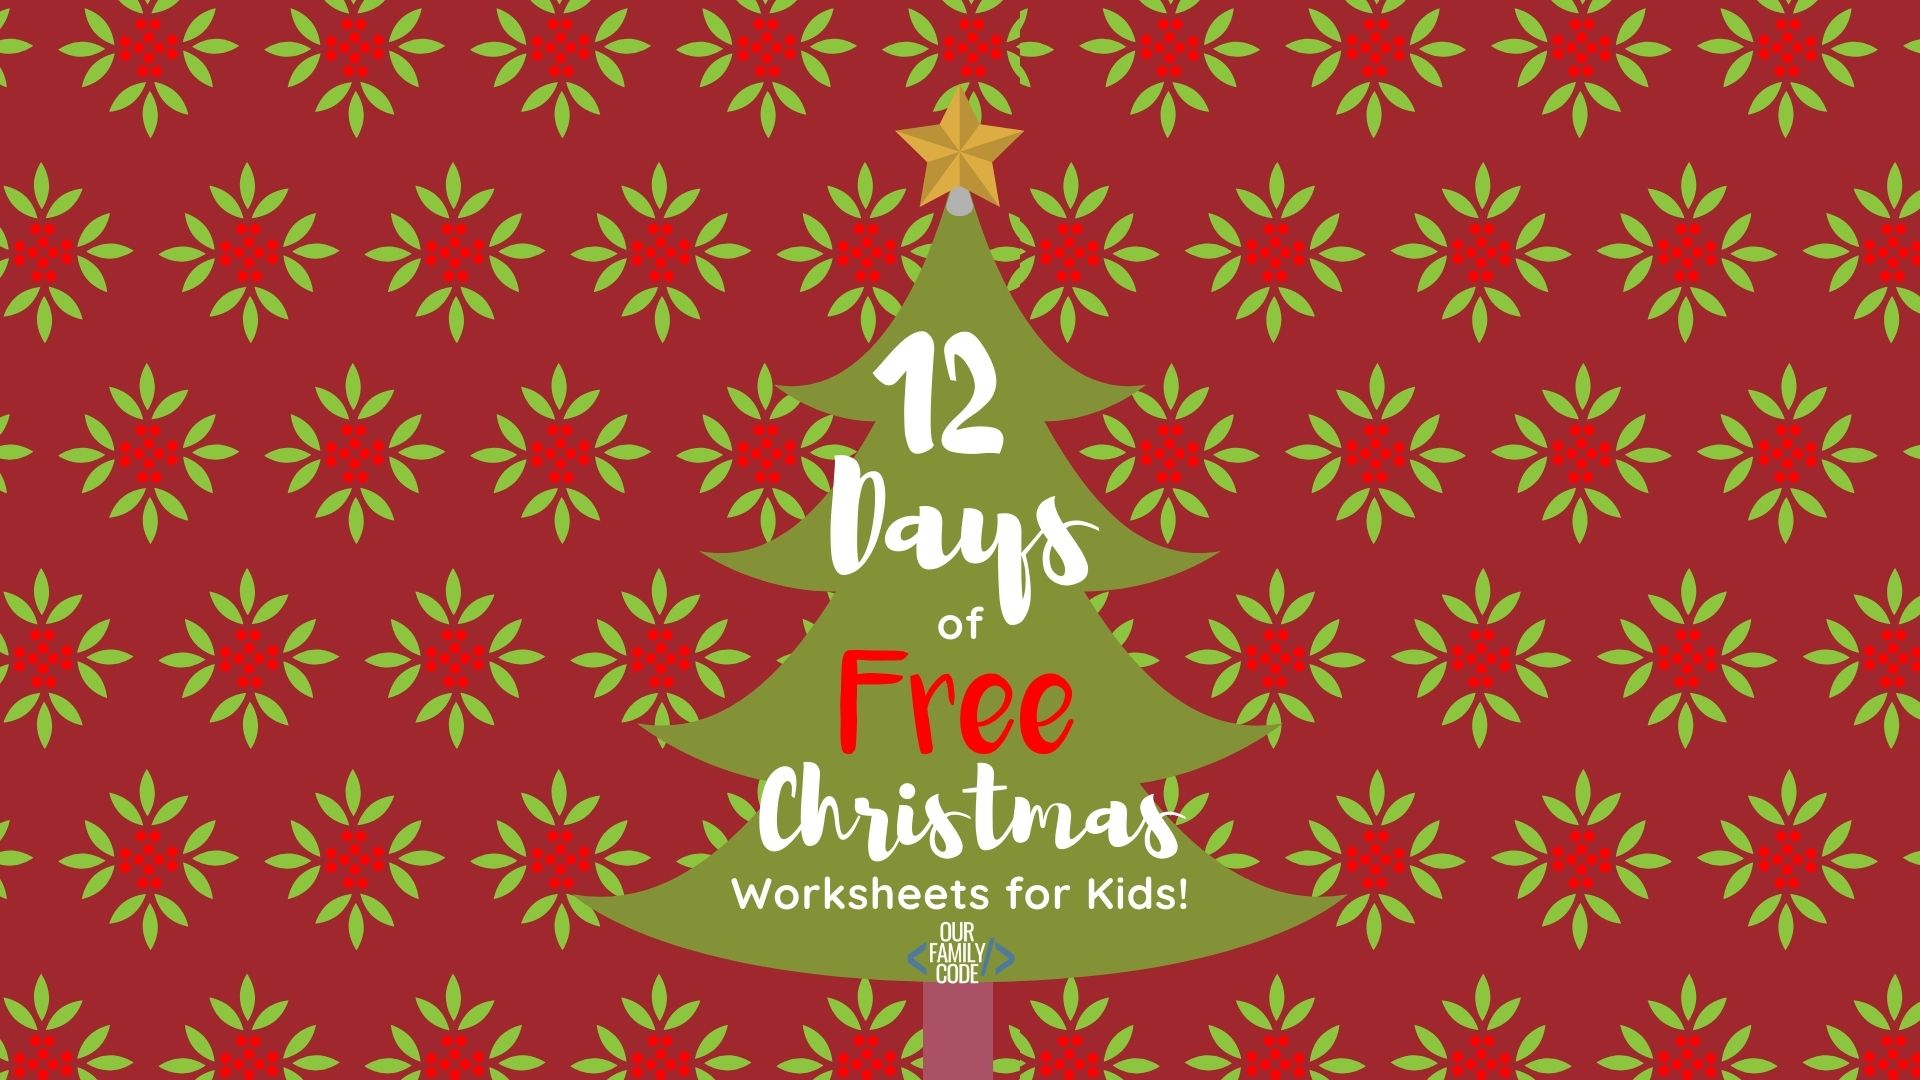 A picture of 12 days of free christmas worksheets for kids on red background.